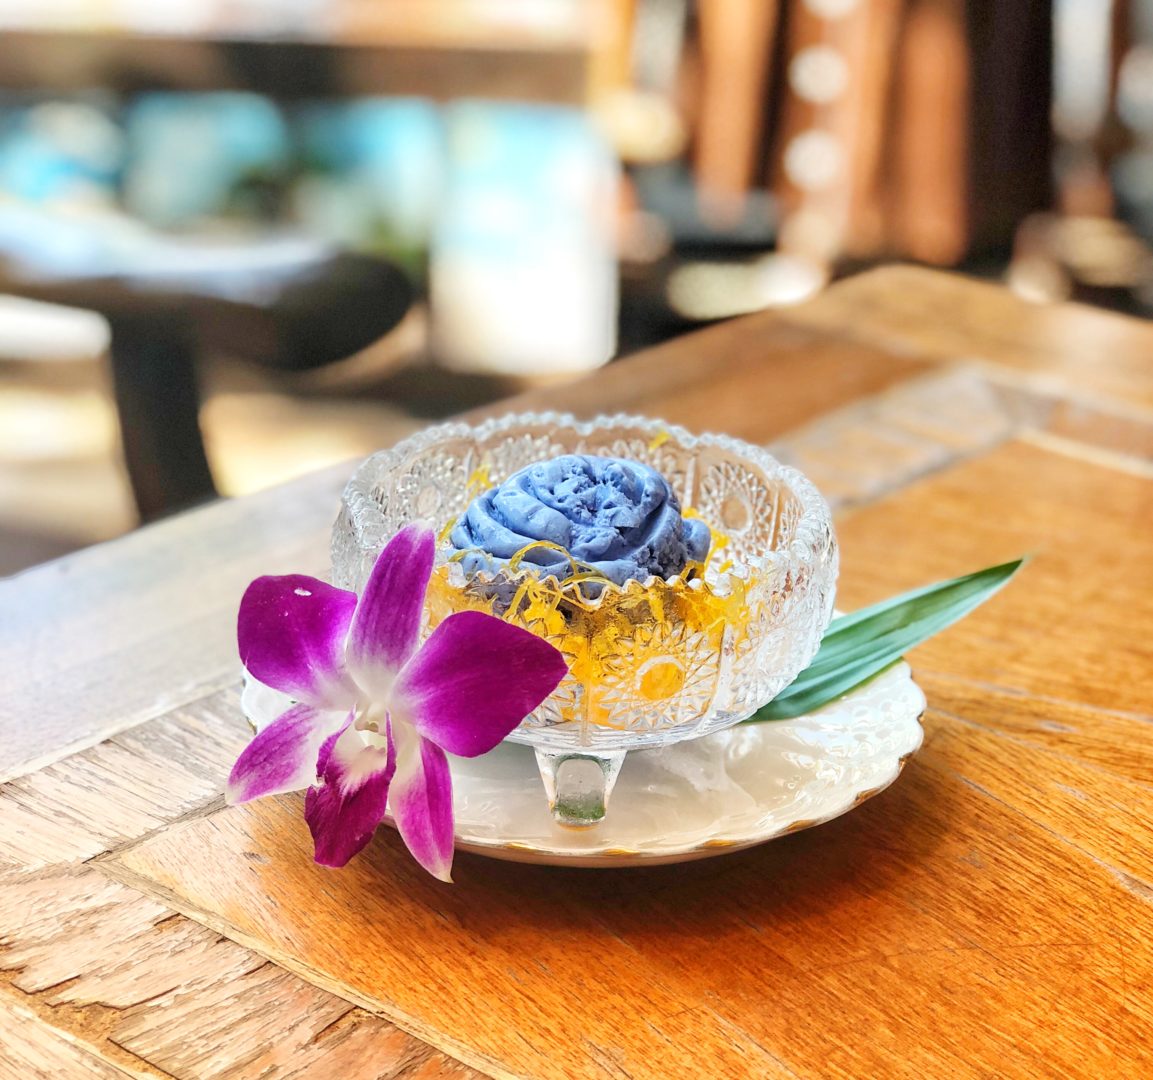 butterfly pea ice cream with orchid at fellsion cafe phuket thailand